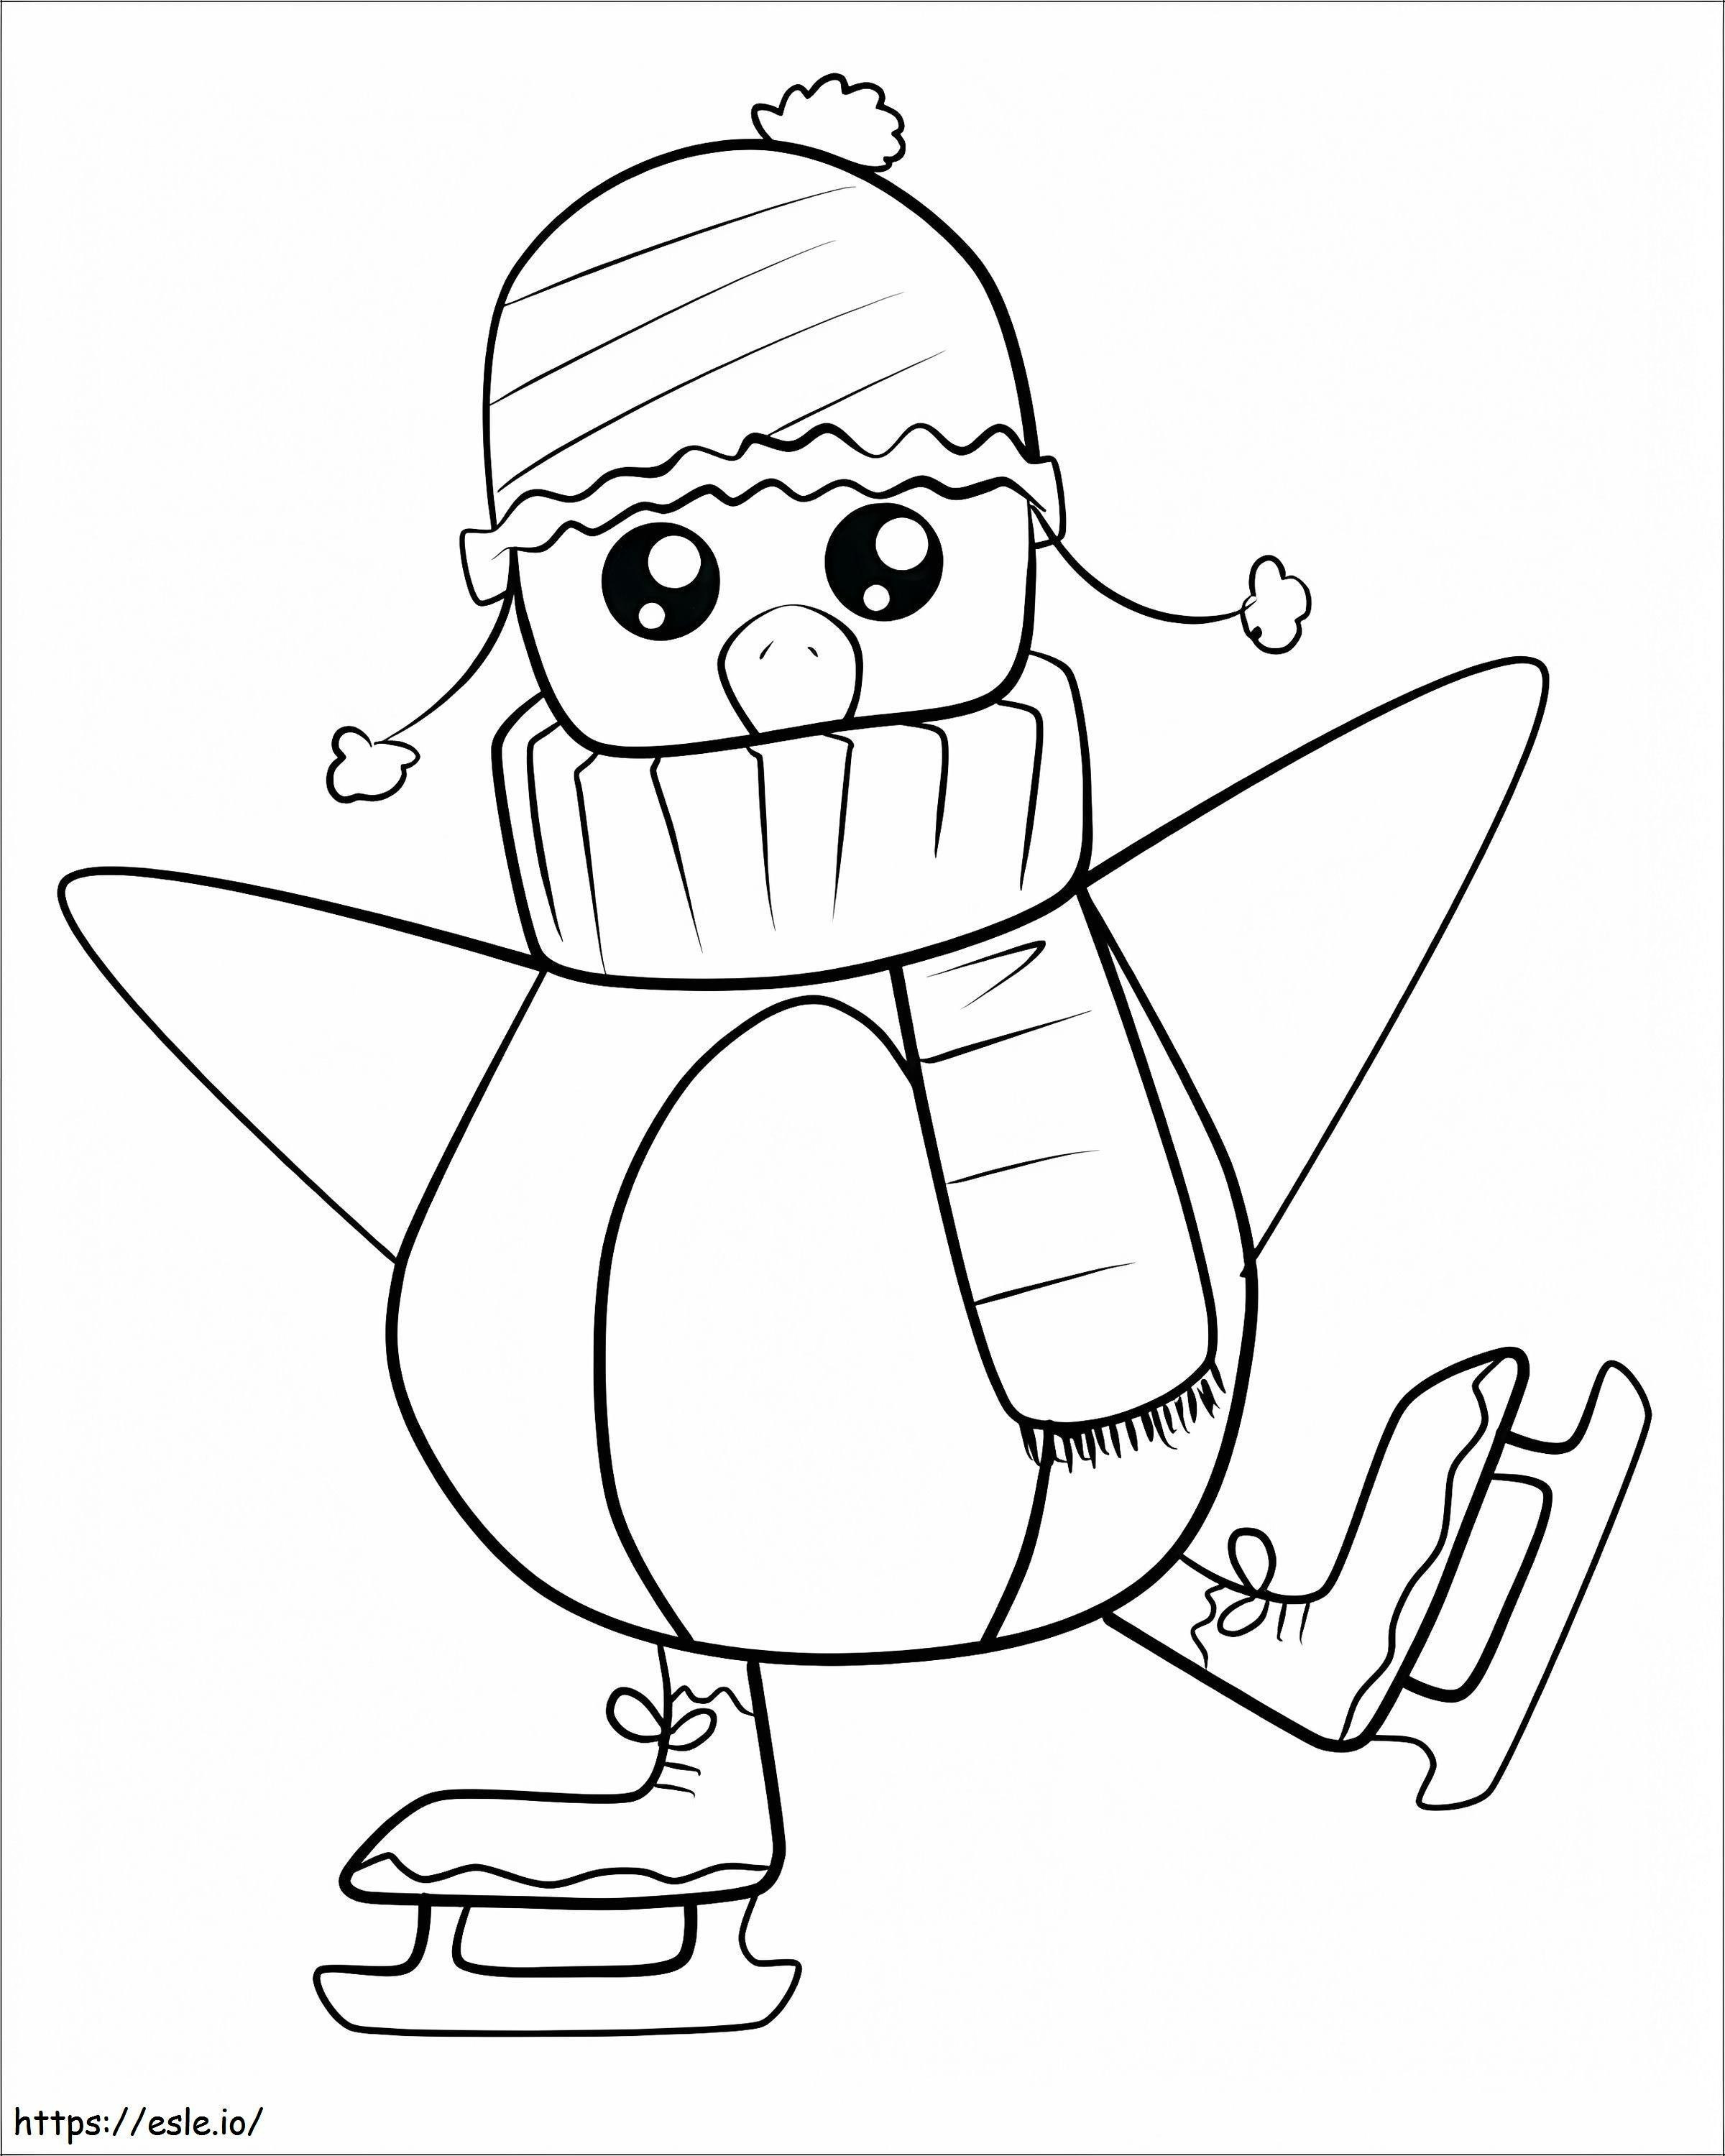 1556866148 Ice Skating Printable Page Free Winter Themed coloring page